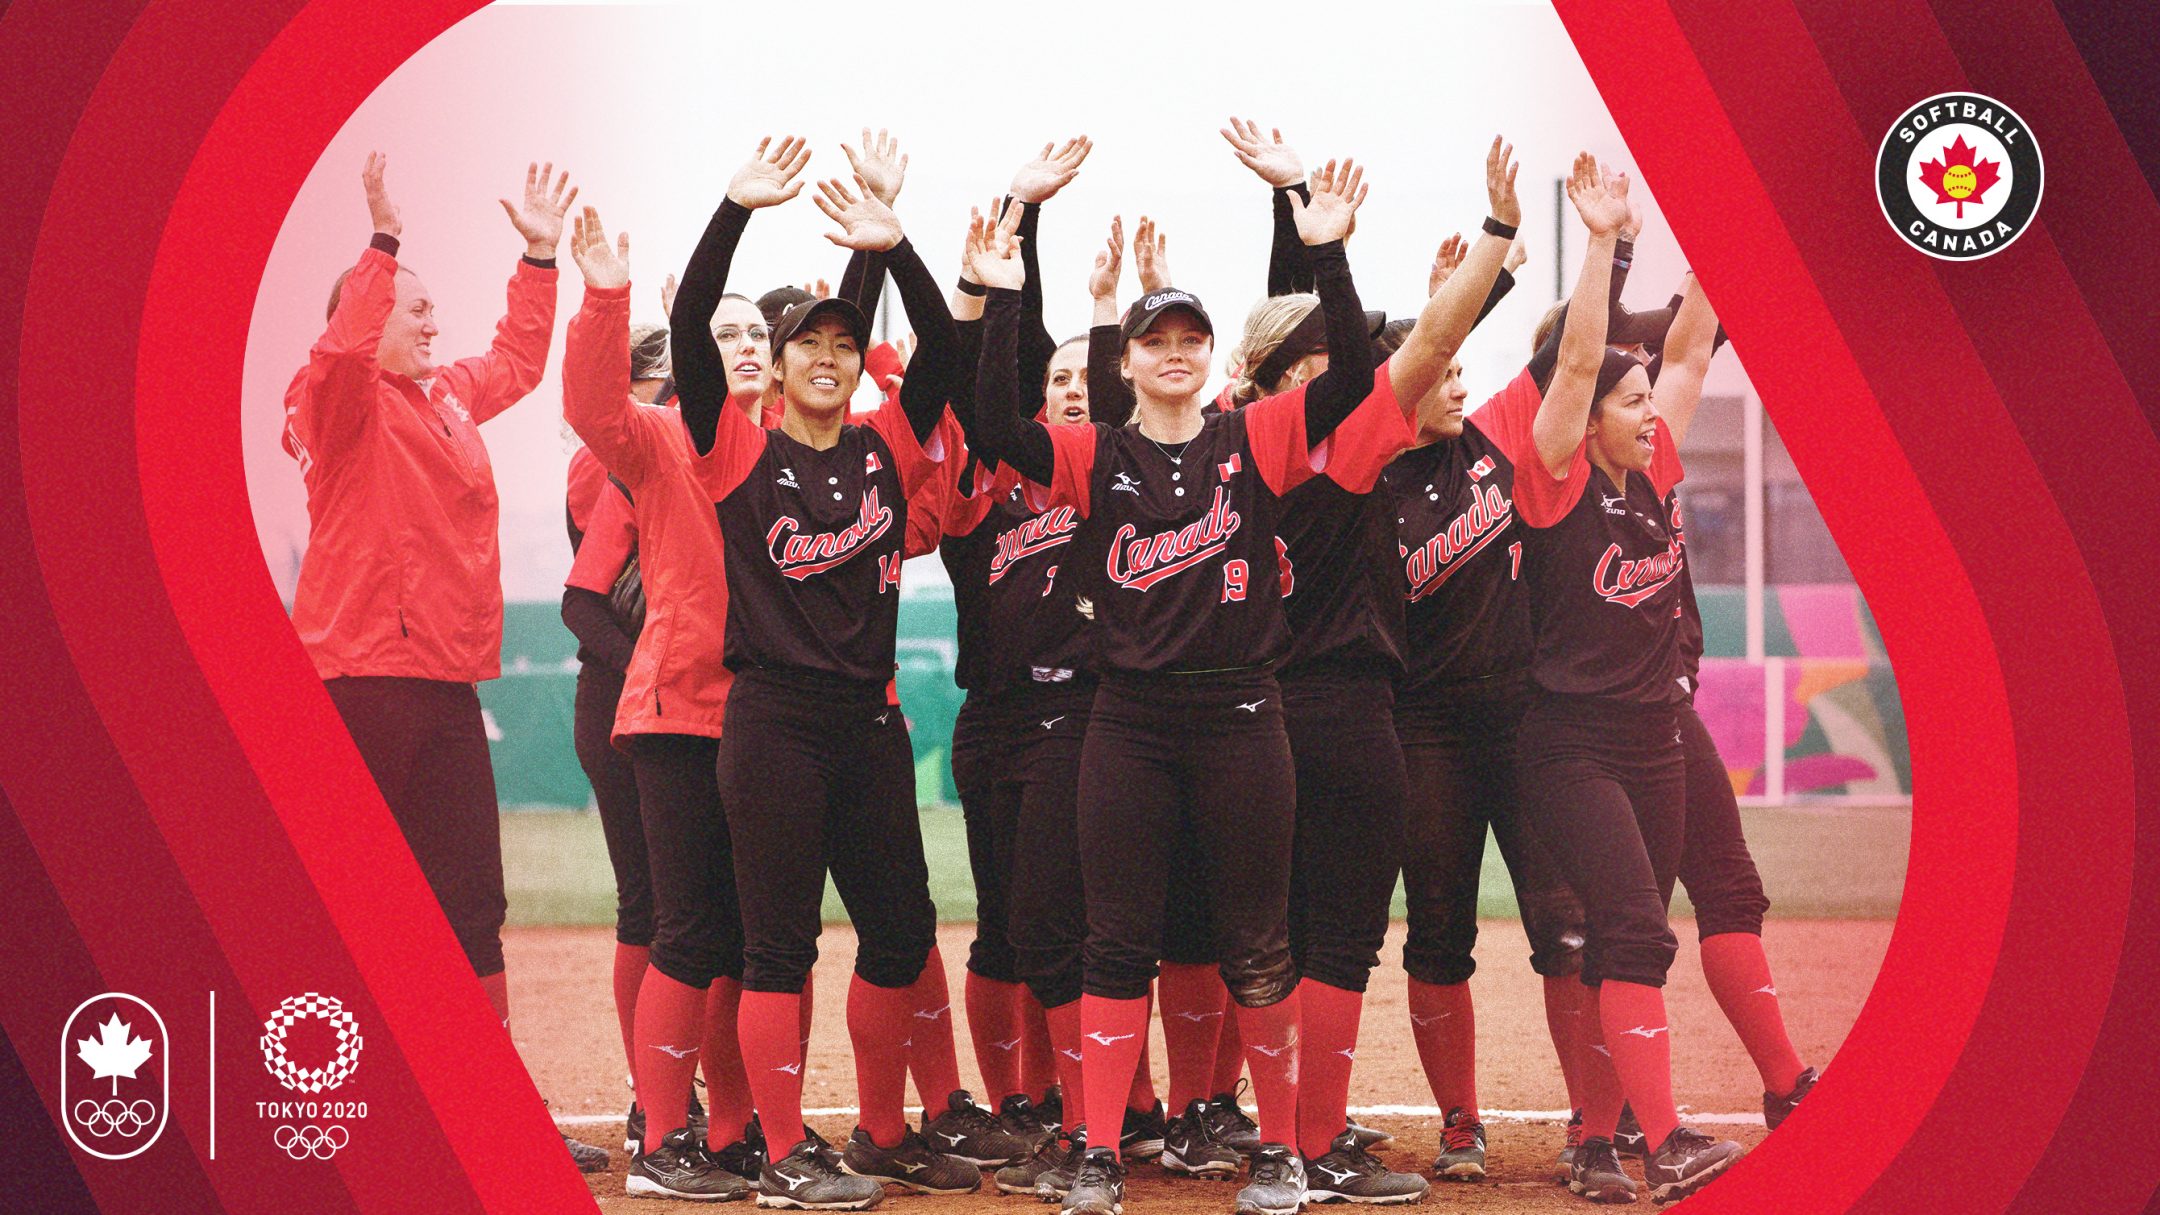 Team Canada Ready To Get Going In Softball S Olympic Return Team Canada Official Olympic Team Website